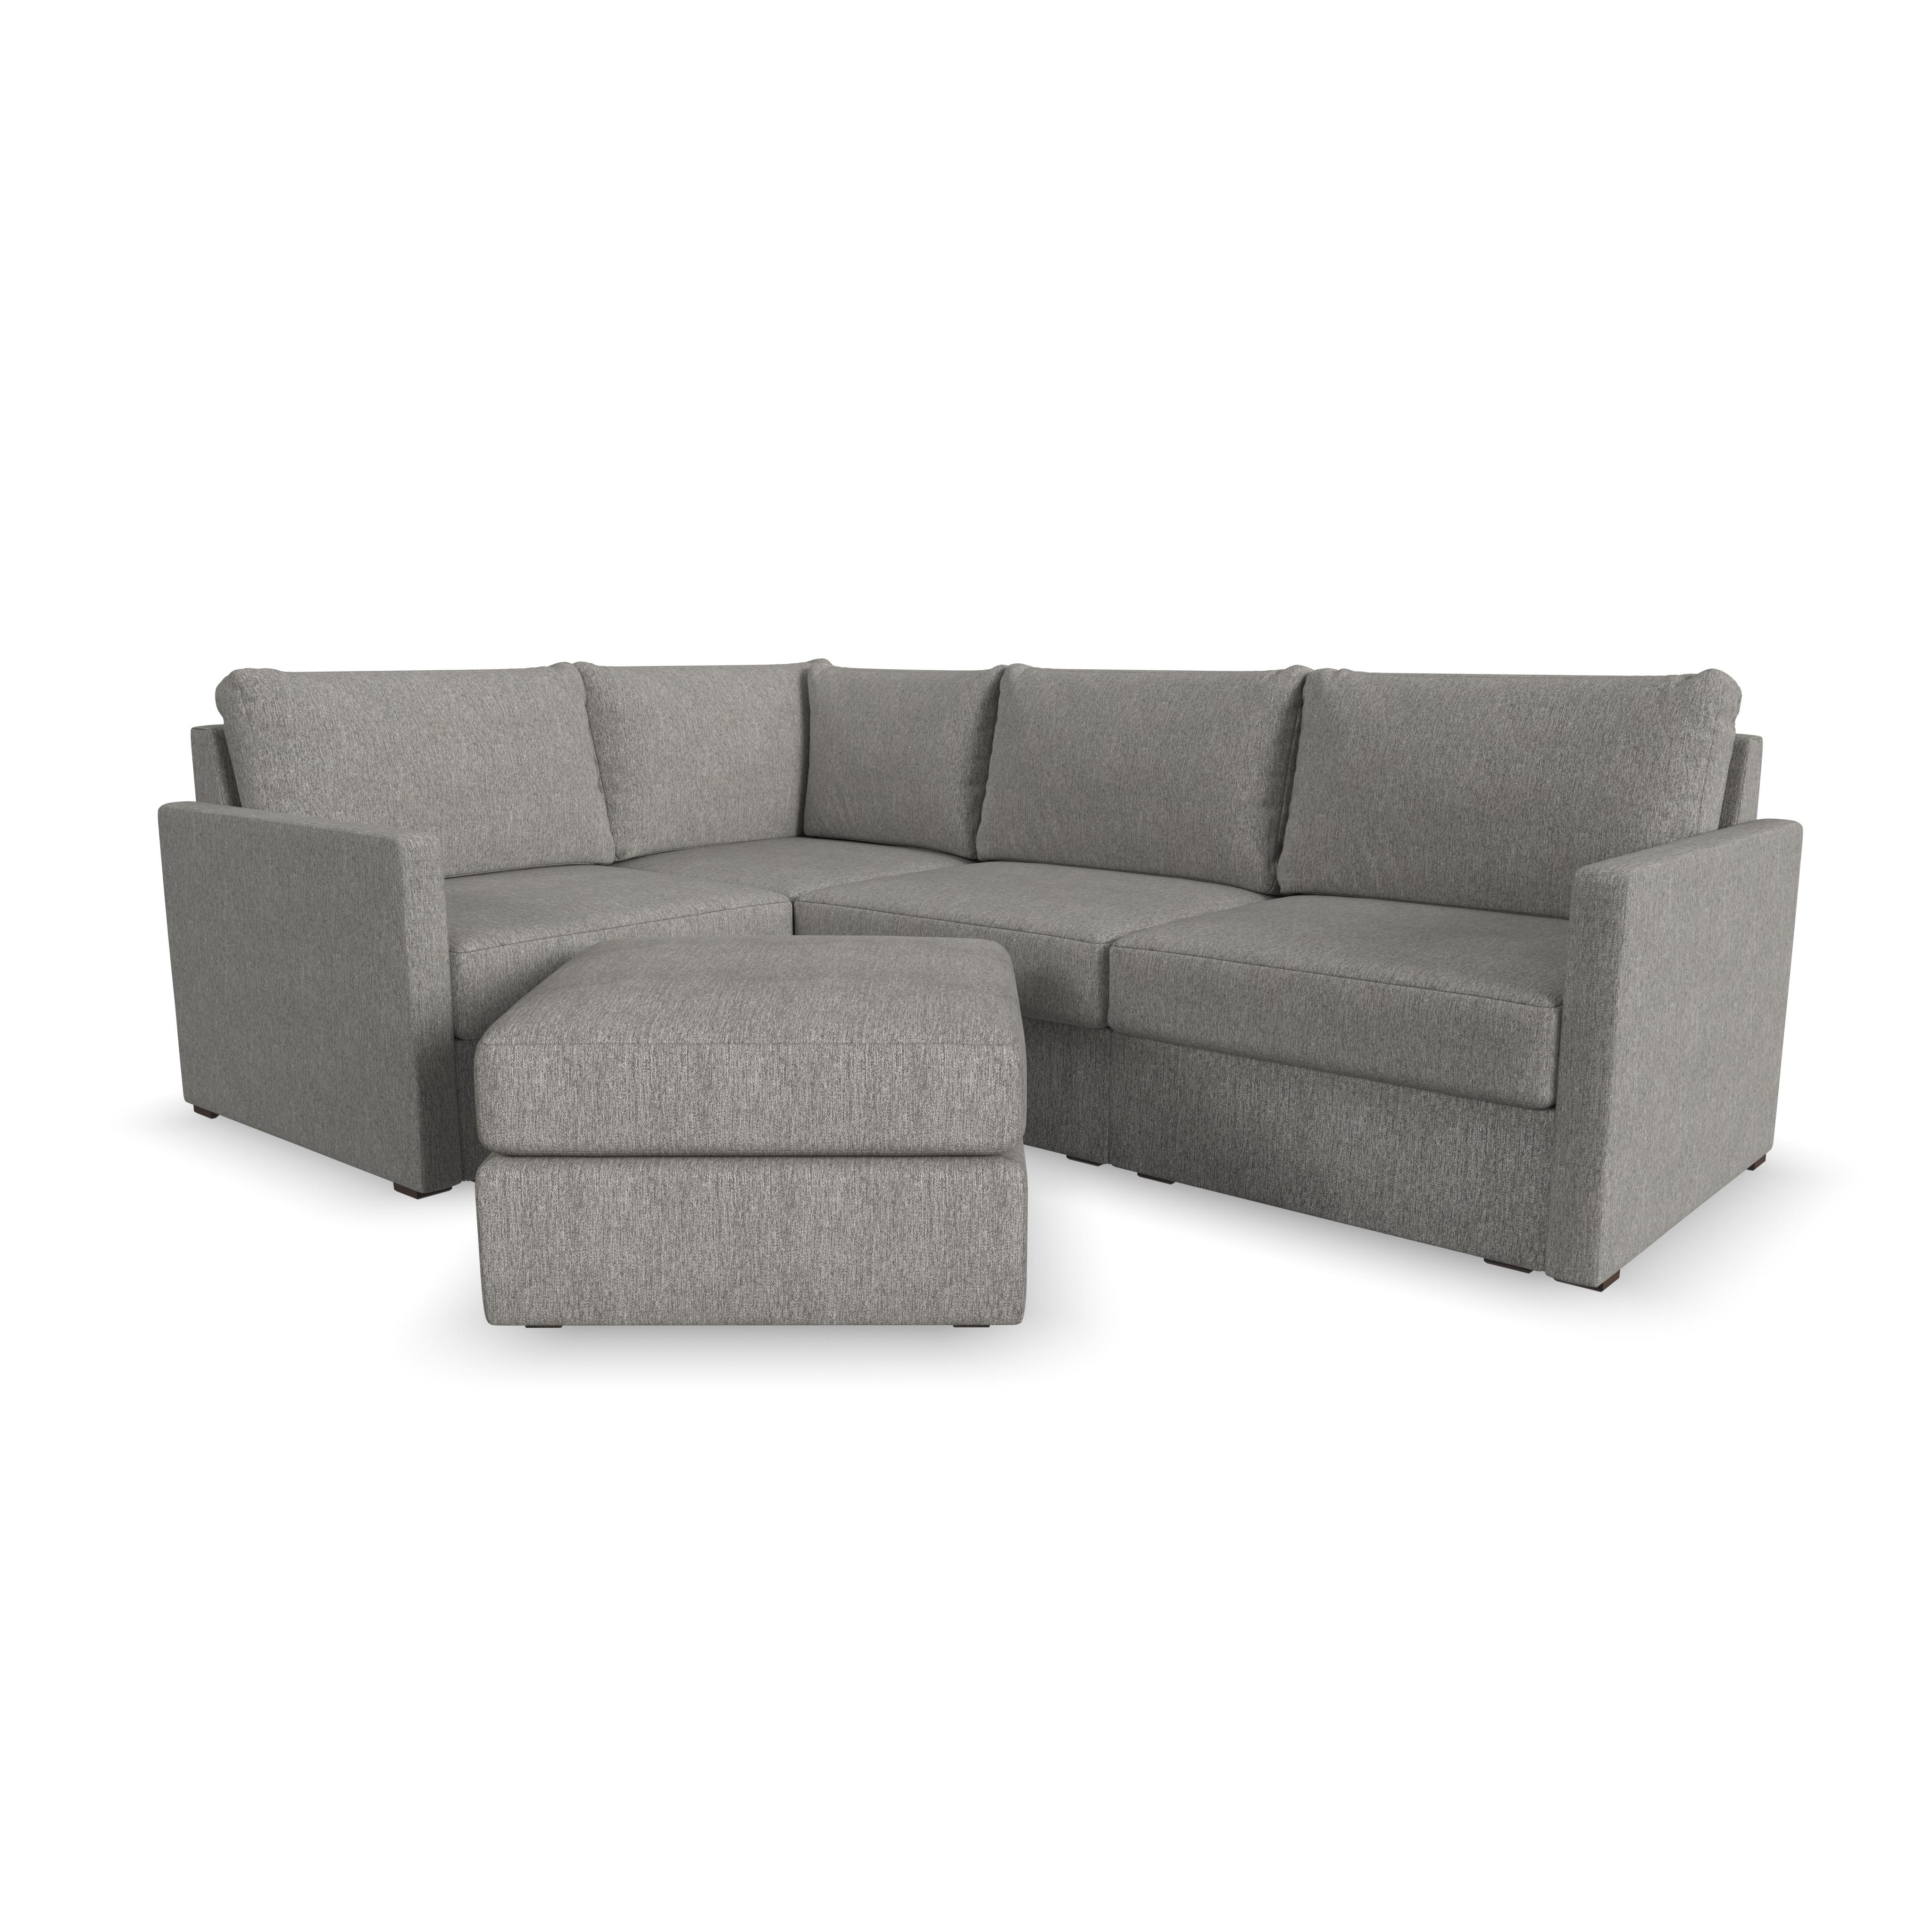 Flexsteel Flex 4-Seat Sectional with Narrow Arm and Ottoman